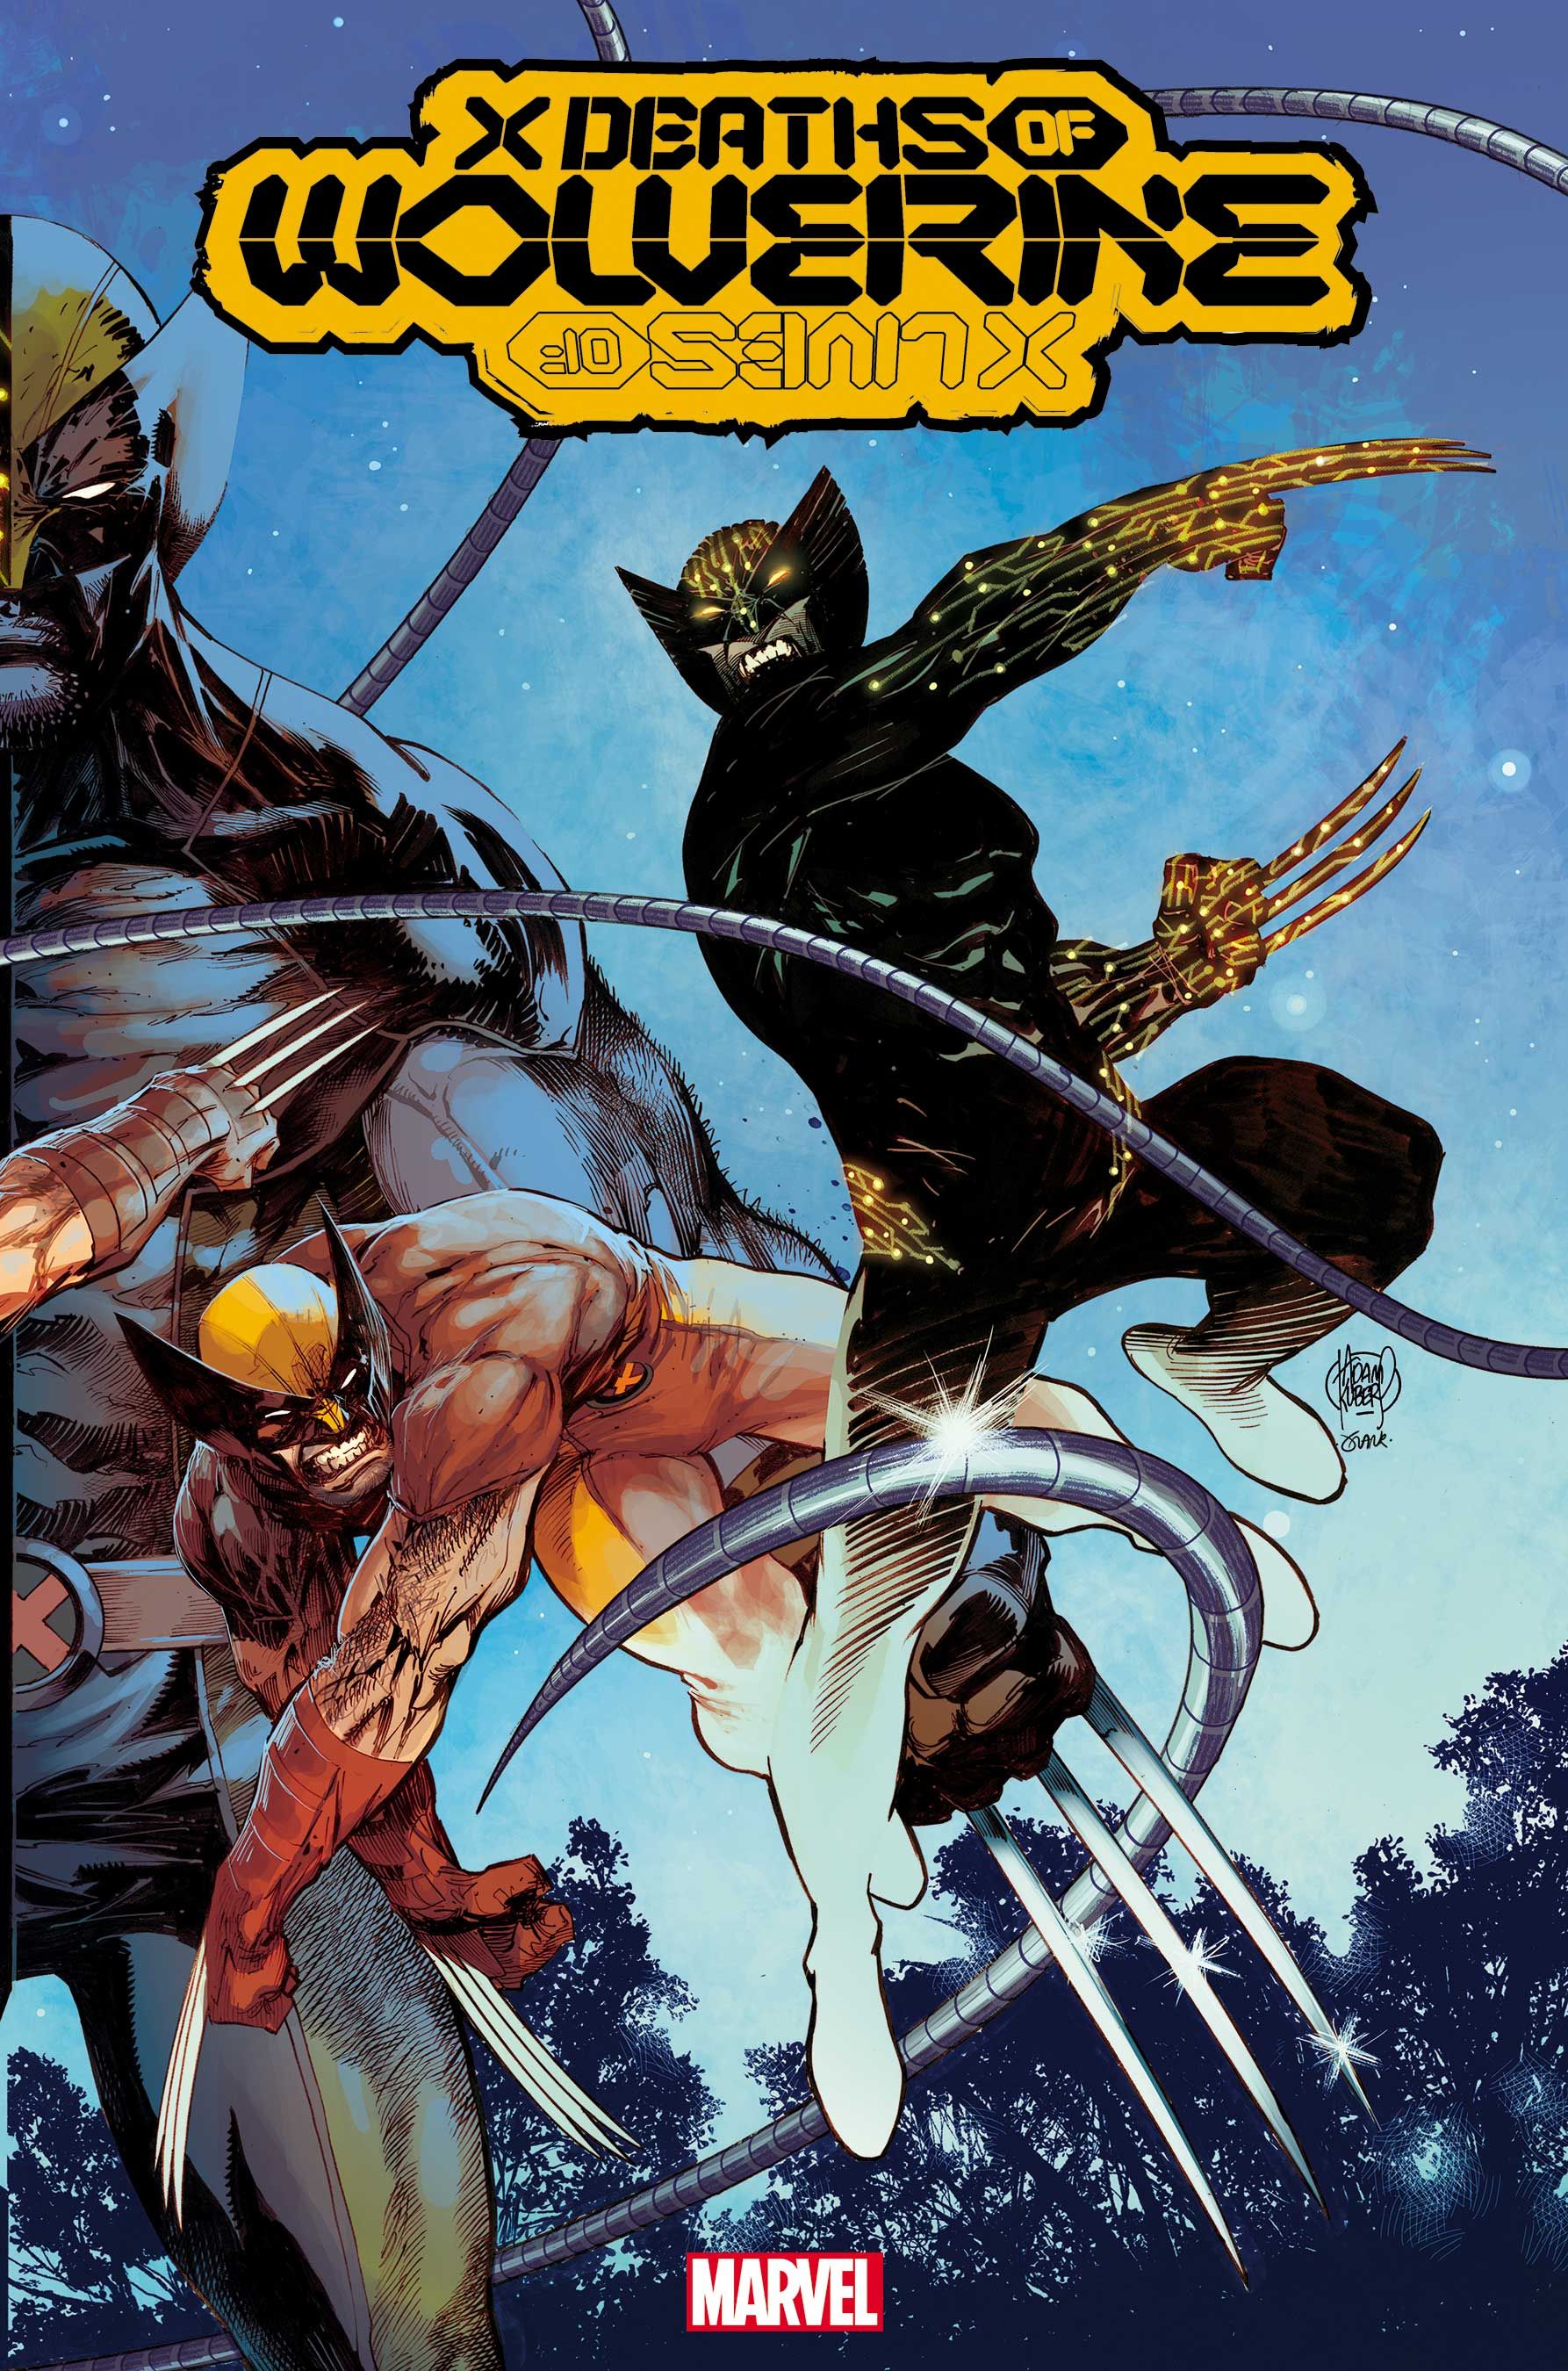 Cover art for X Deaths of Wolverine #5, by Adam Kubert